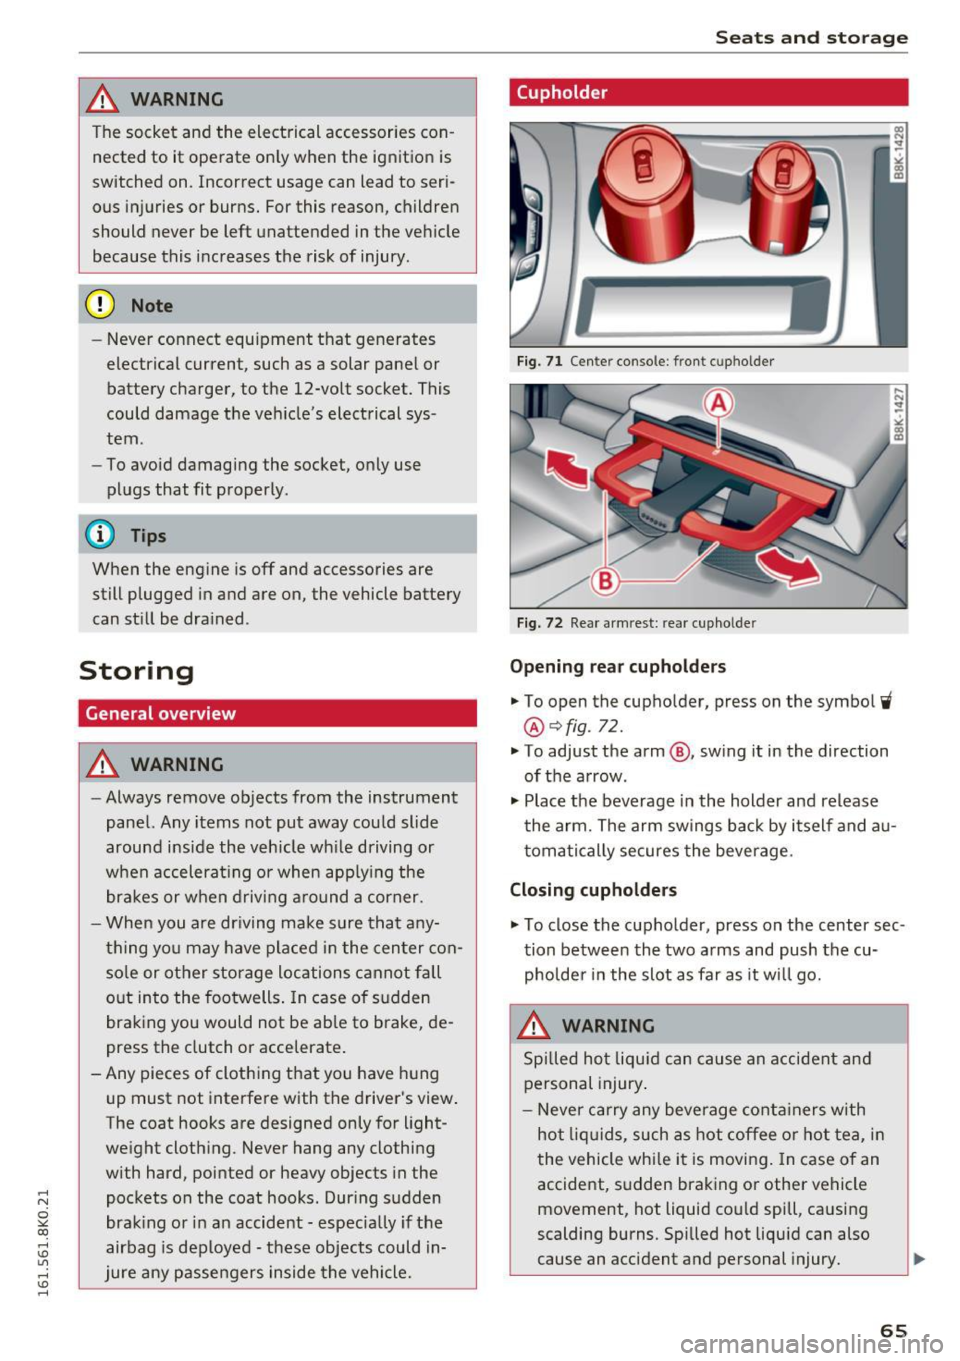 AUDI S4 2016  Owners Manual ,...., 
N 
0 
"" CX) ,...., 
I.Cl U"I ,...., 
I.Cl ,...., 
/! WARNING 
The  socket  and  the  electrical  accessories  con­
nected  to  it  operate  on ly when  the  ignition  is 
switched  on.  Inc